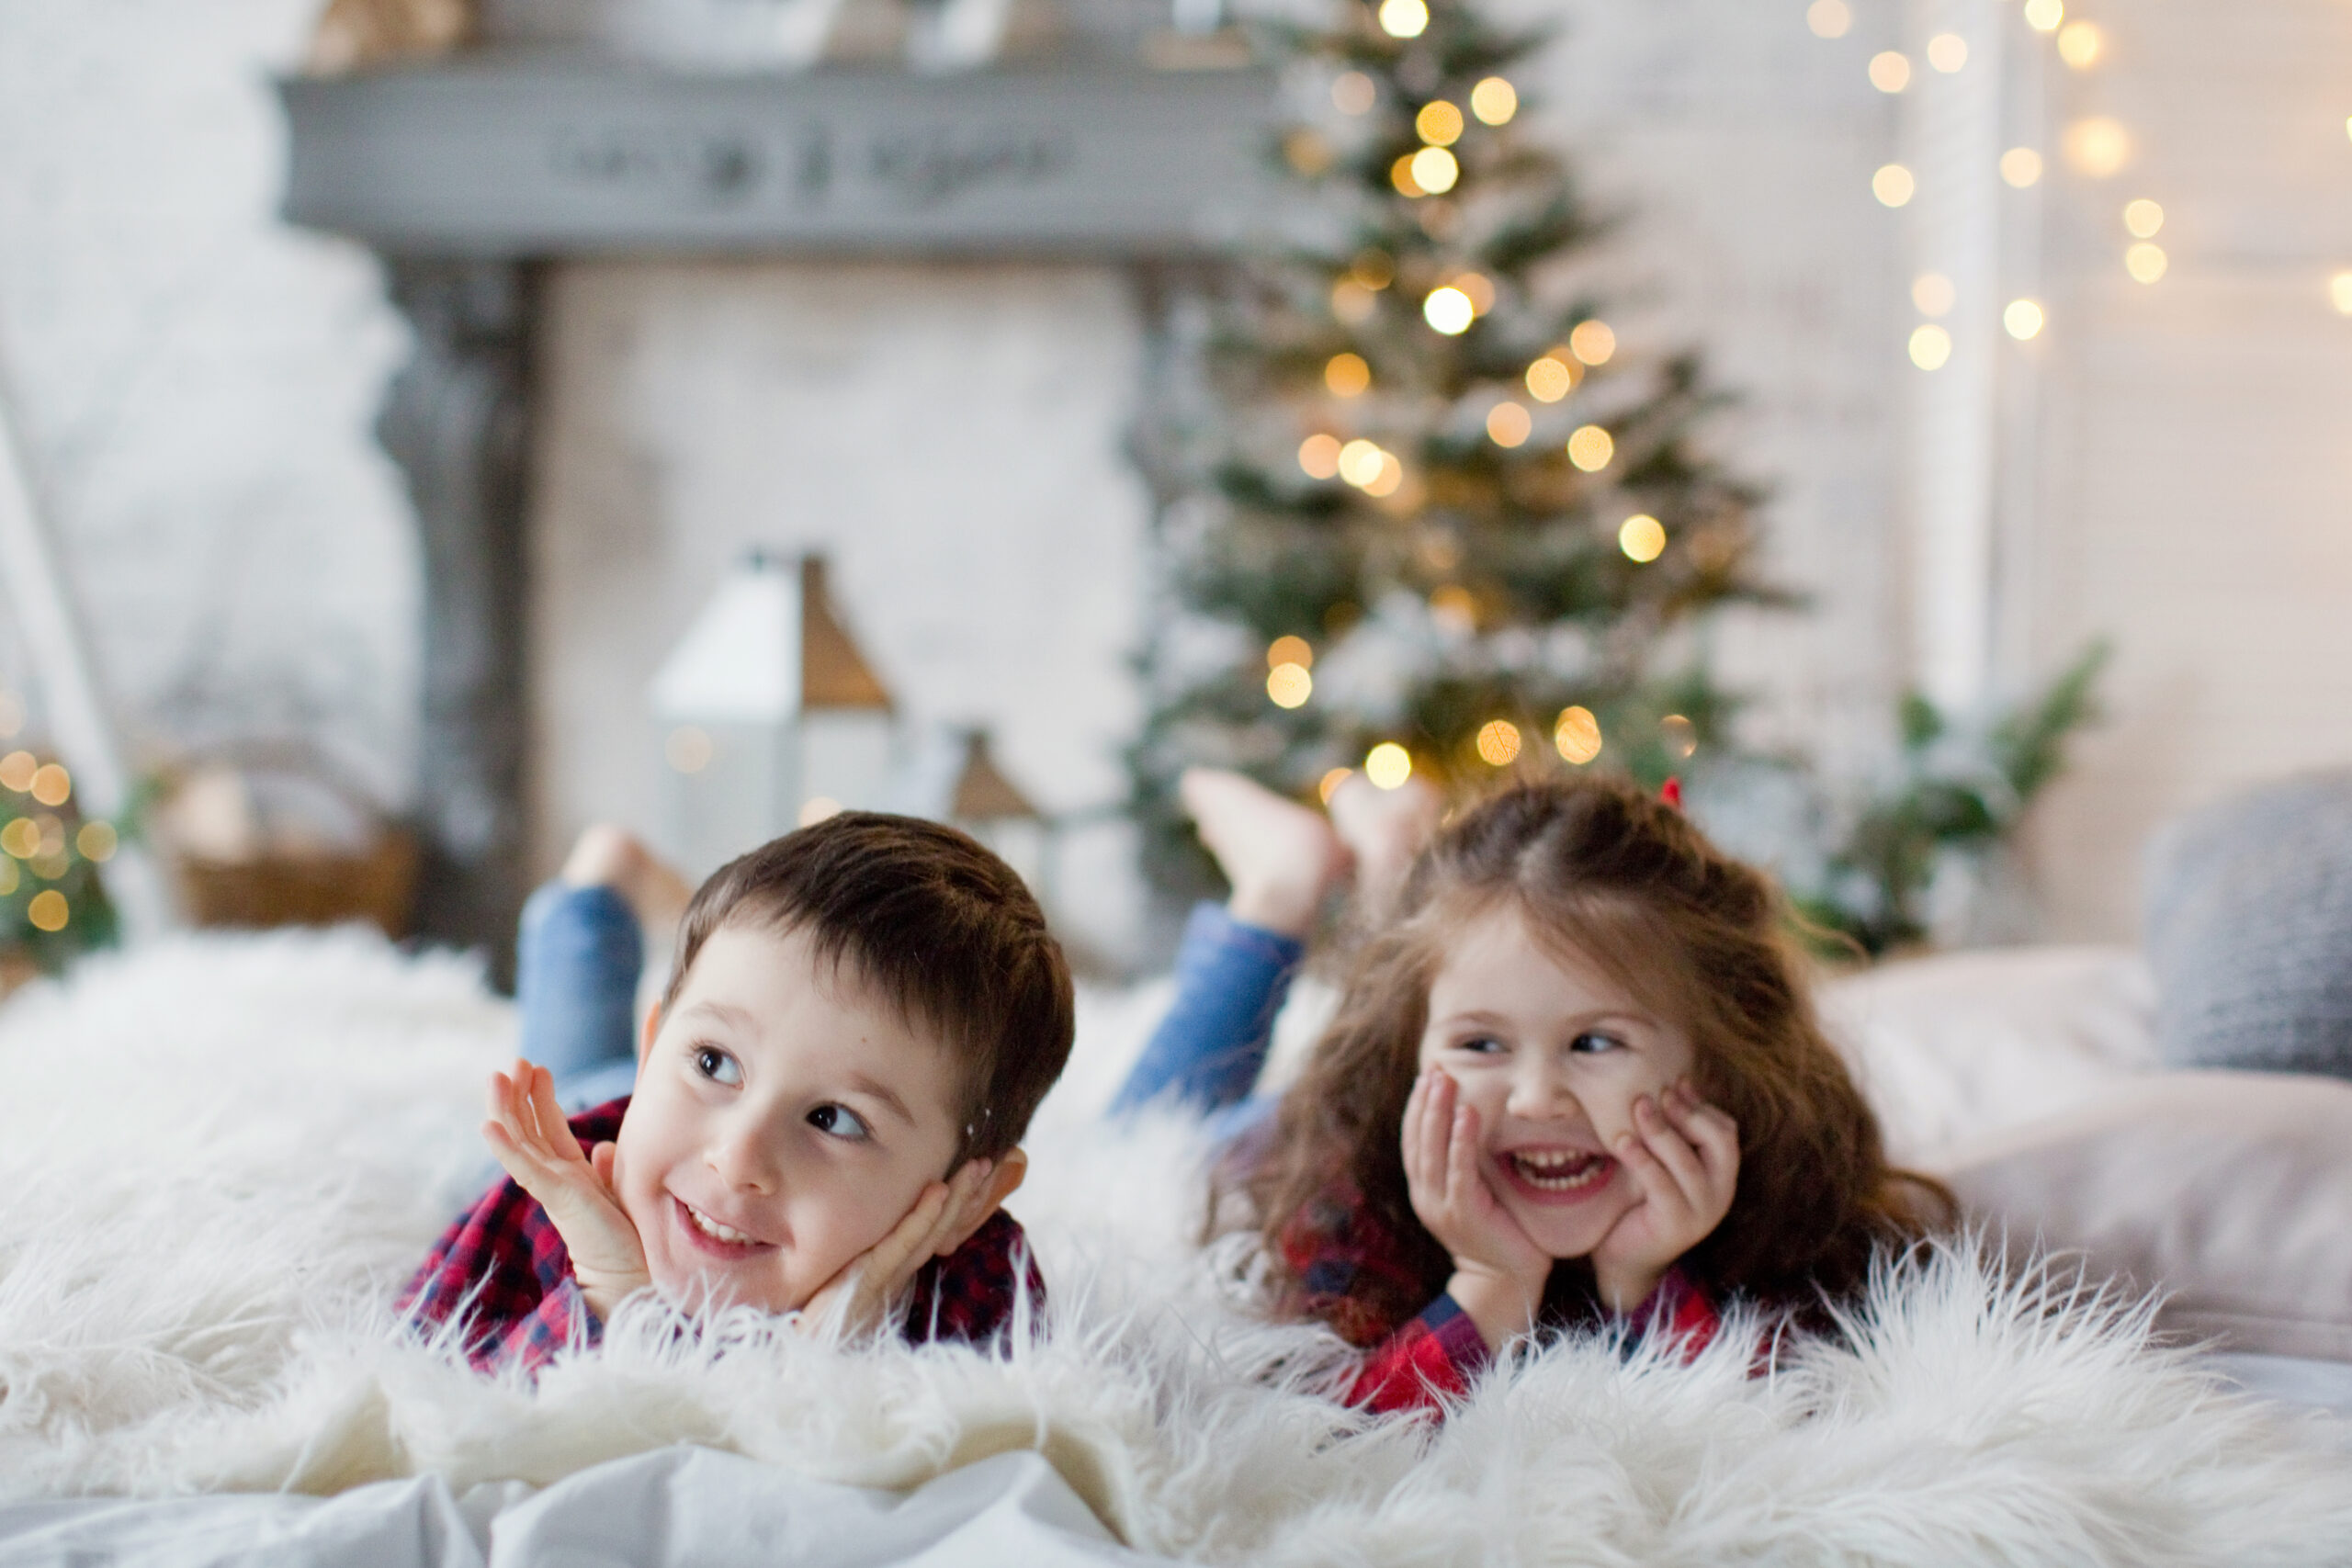 kids with Christmas tree in background. Text overlay on pin reads "minimalist Christmas gifts for kids! Stuff they actually want!